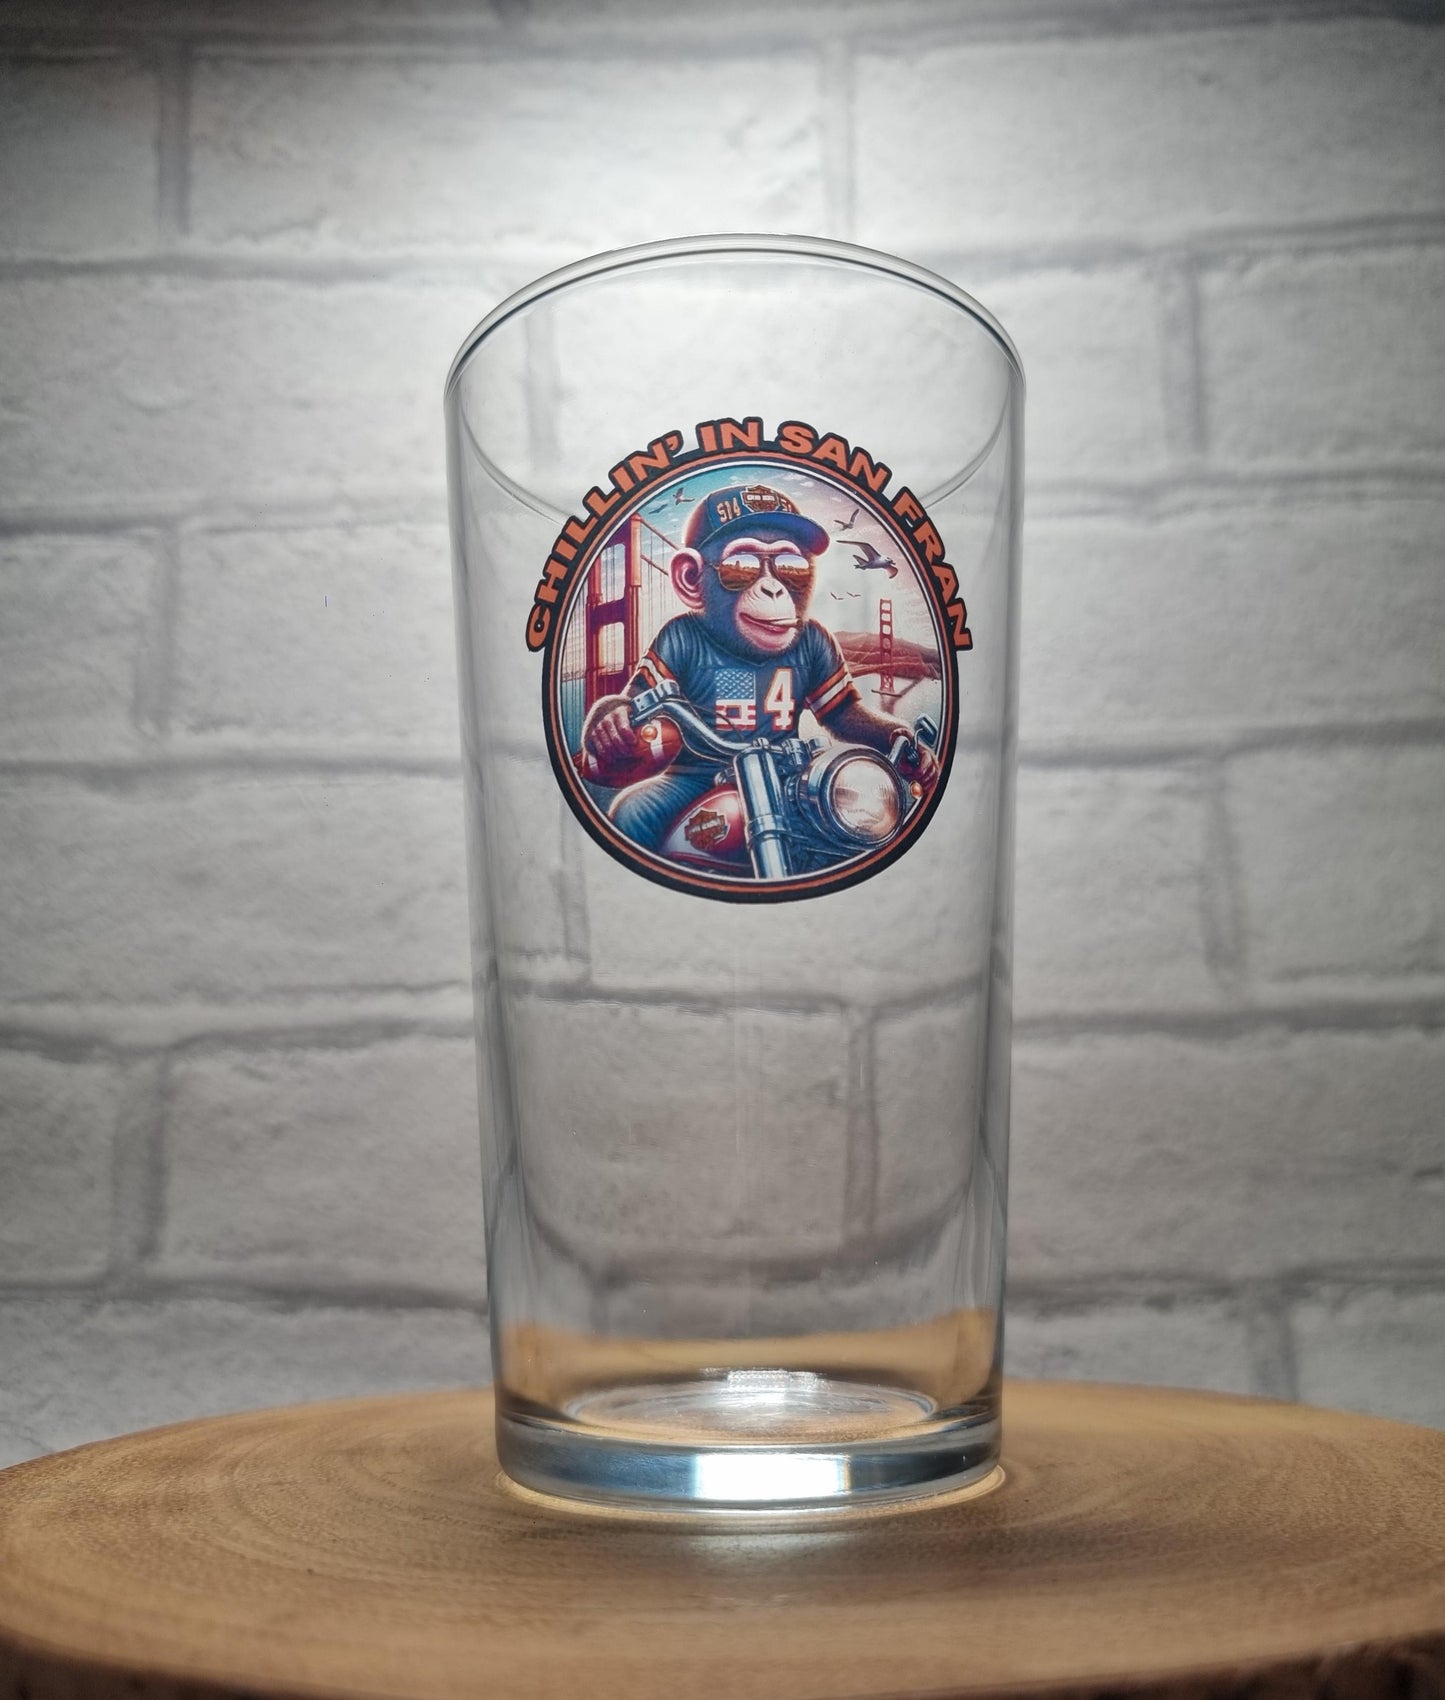 "Monkeying Around the Bay: Harley-Rider Brewmaster Glass - A Golden Gift for Beer Enthusiasts!"